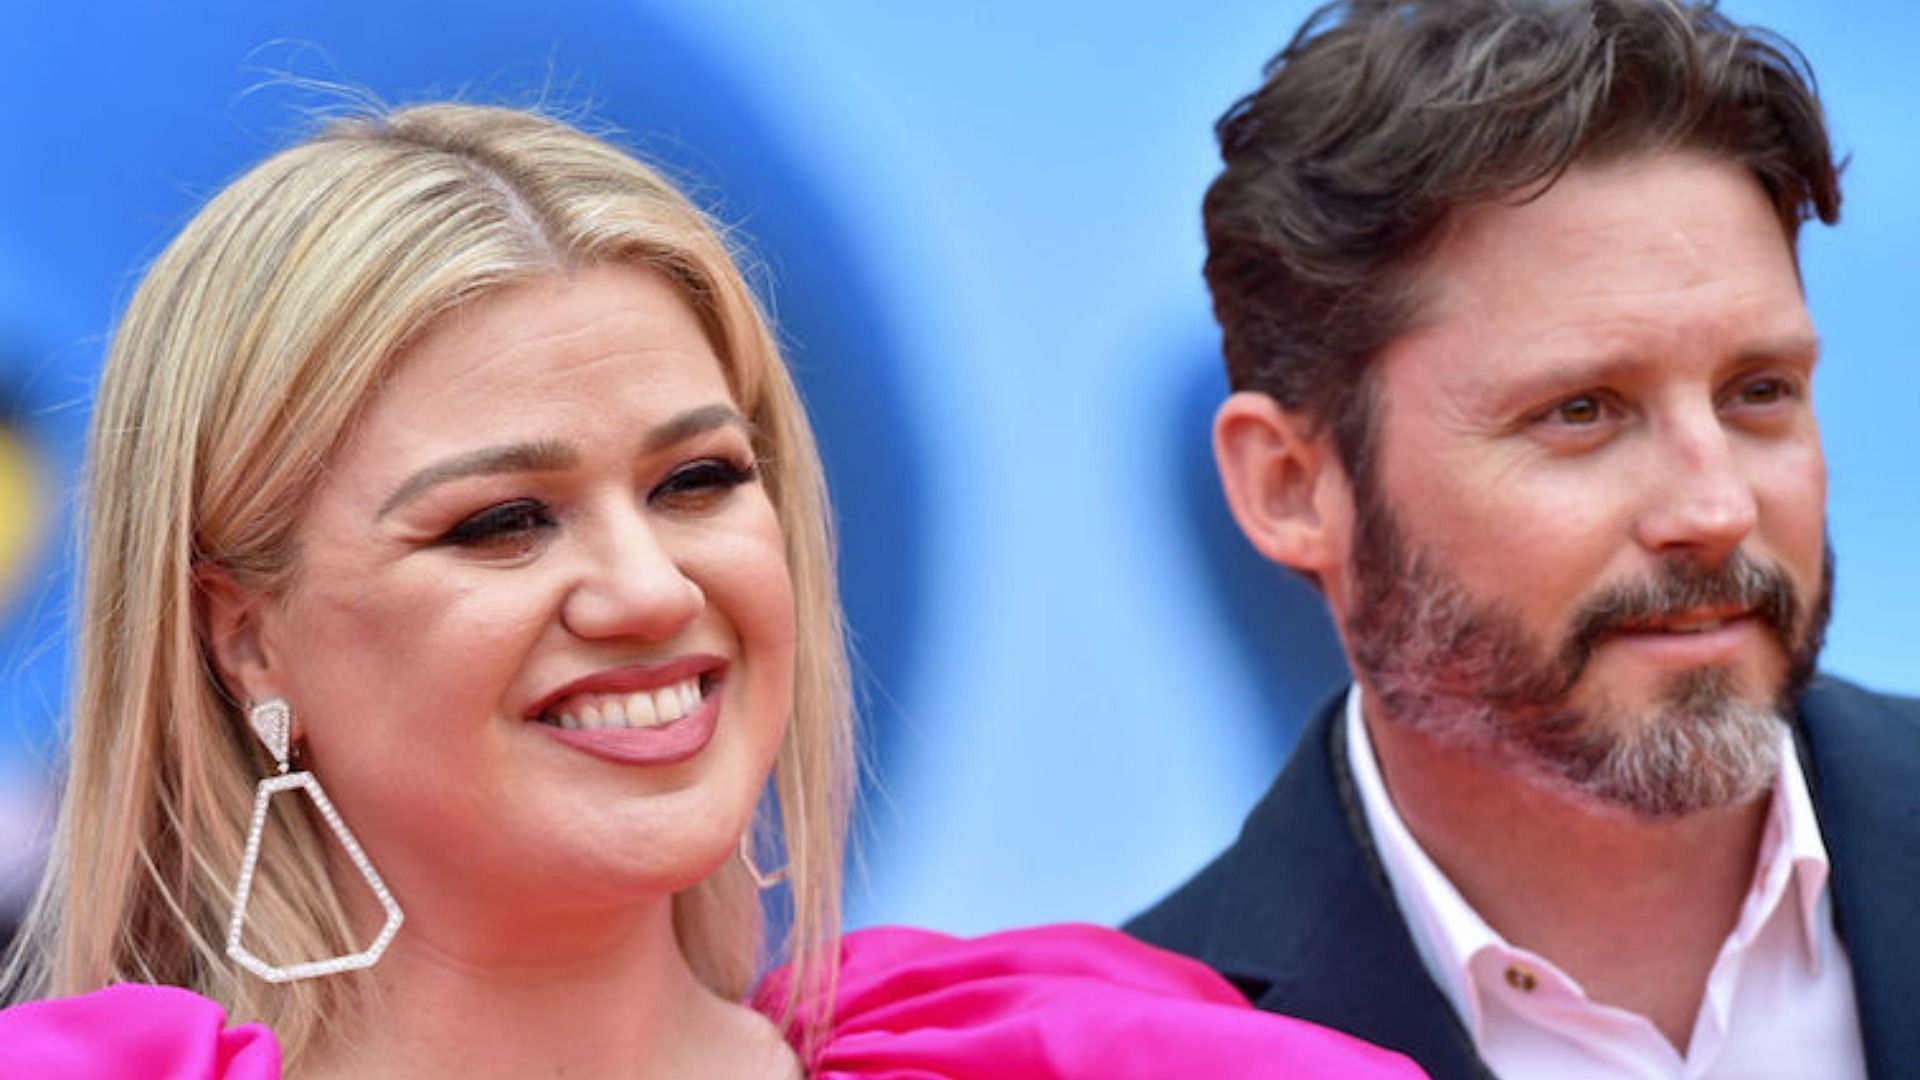 Kelly Clarkson filed for divorce from Brandon Blackstone in June 2020 (Image via Getty Images/ Axelle/Bauer-Griffin)